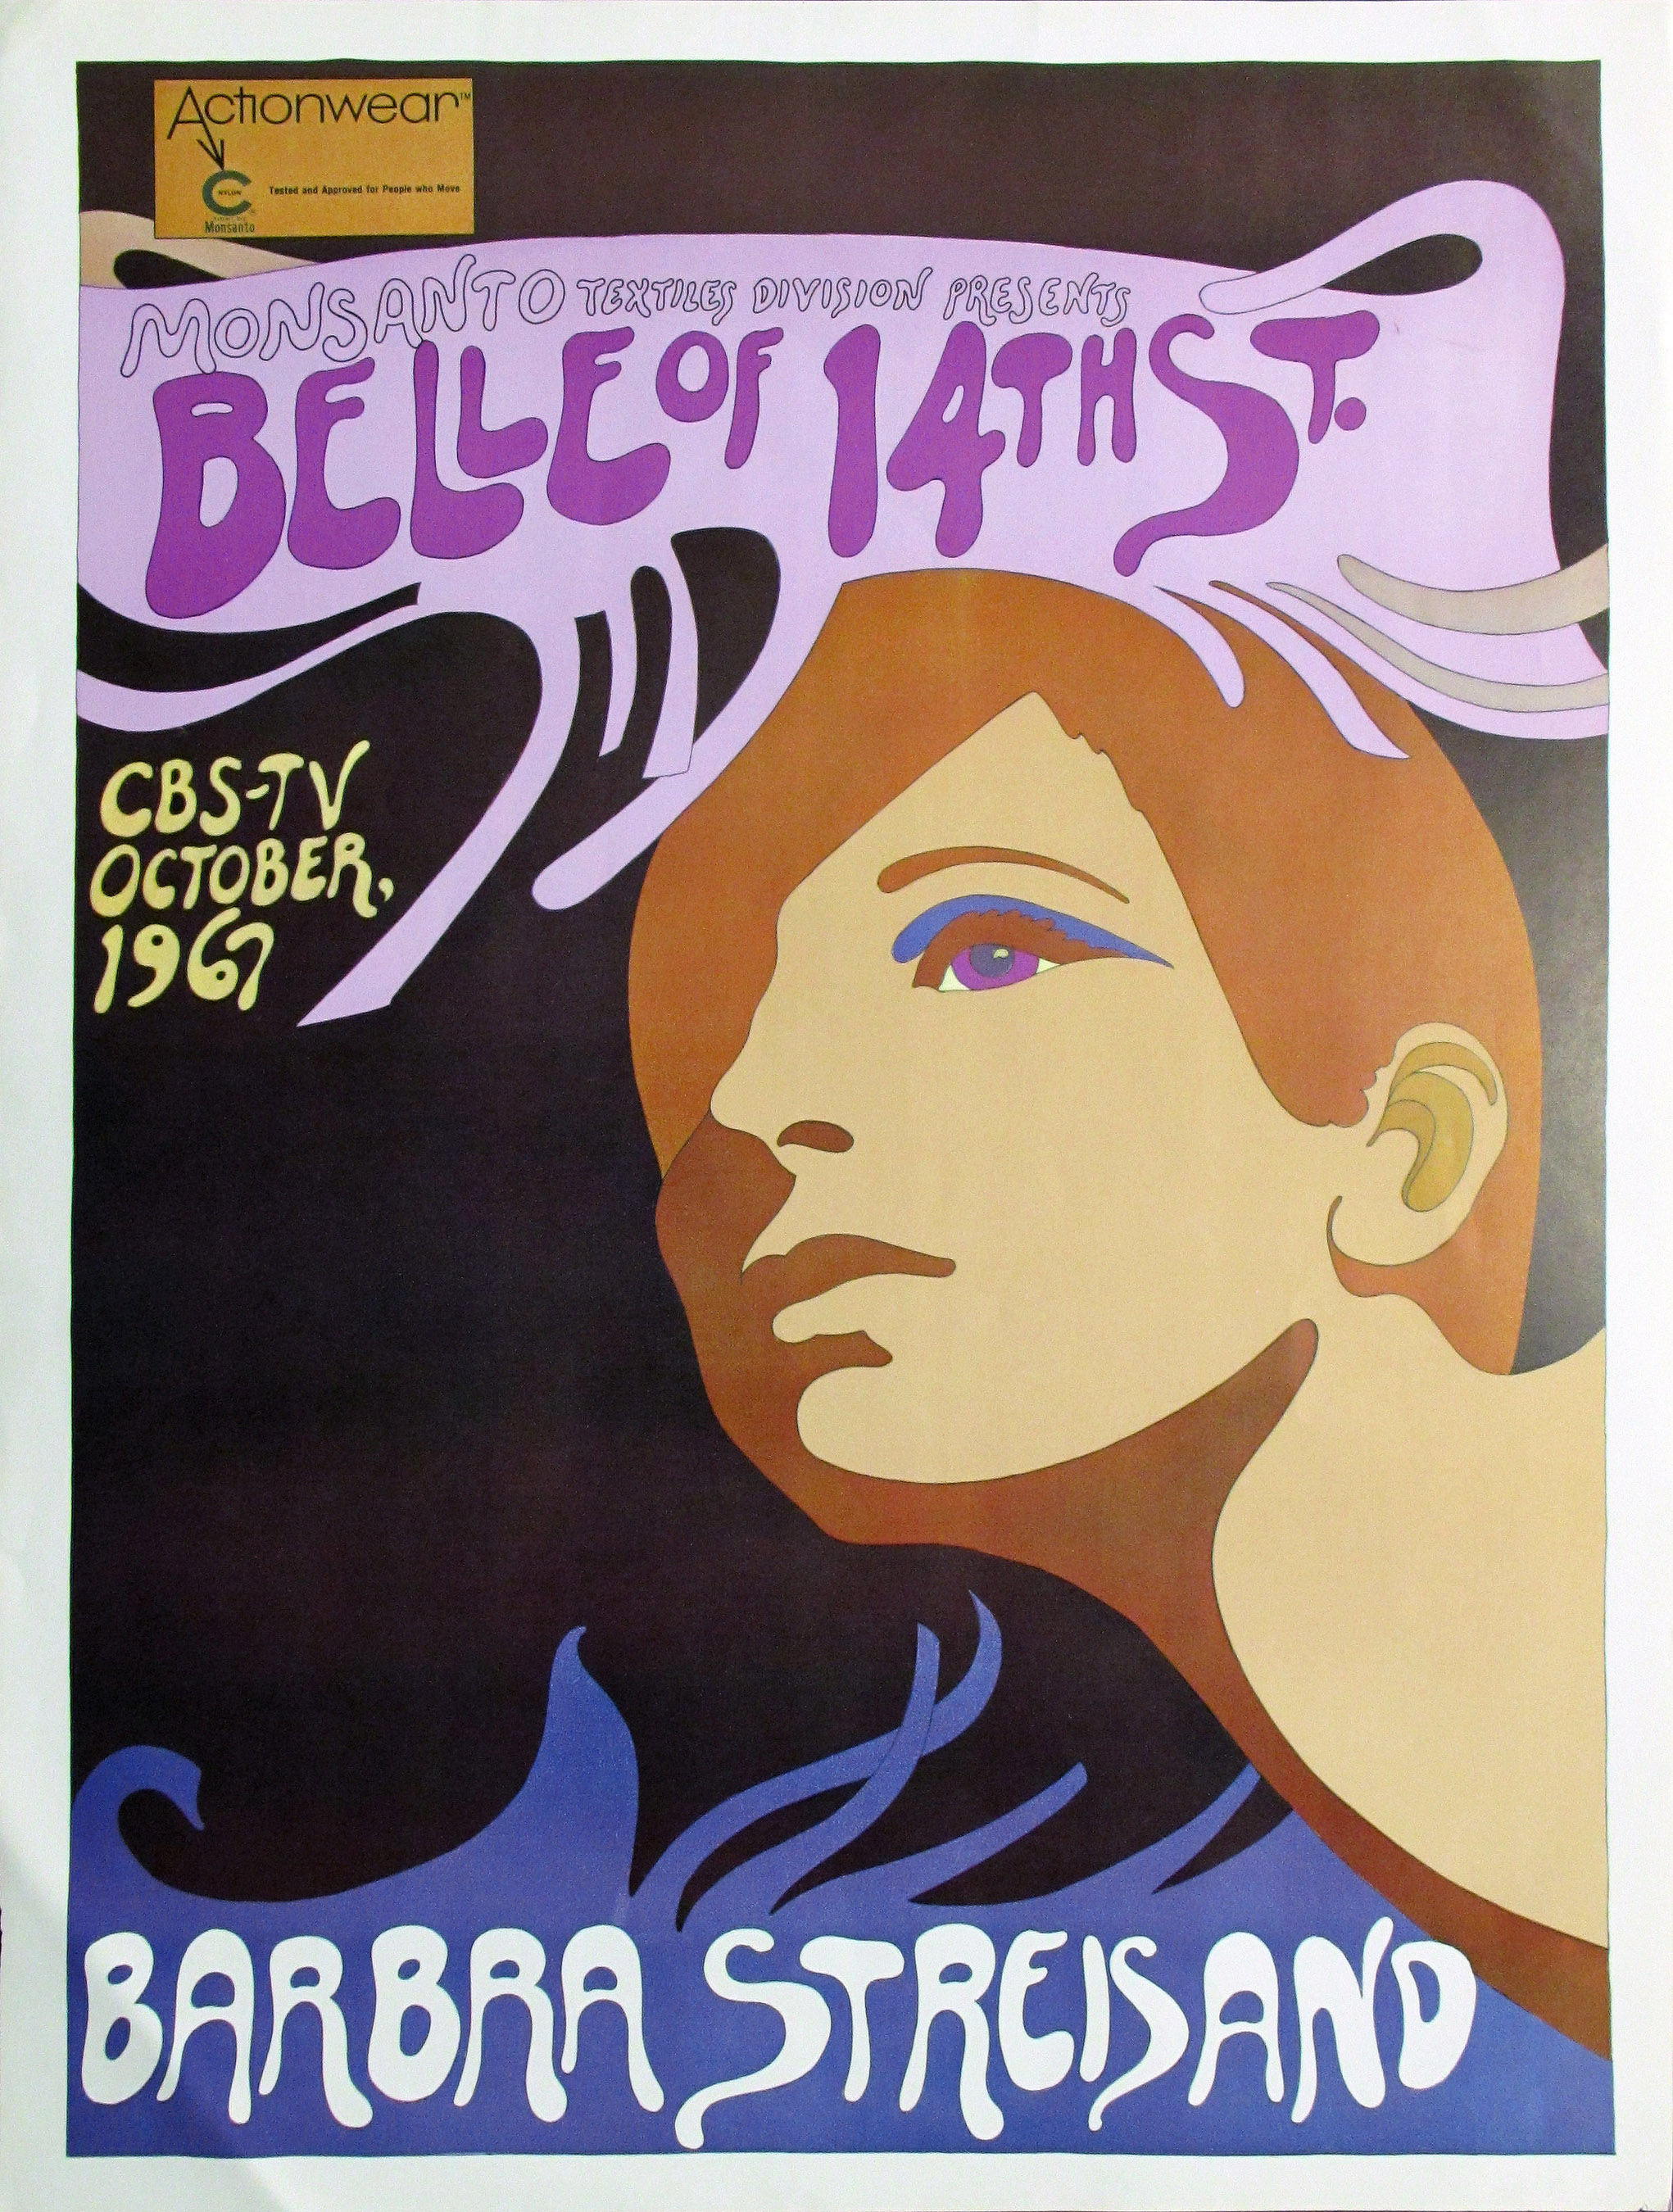 Barbra Streisand Television Promotional Poster For Belle of 14th Street